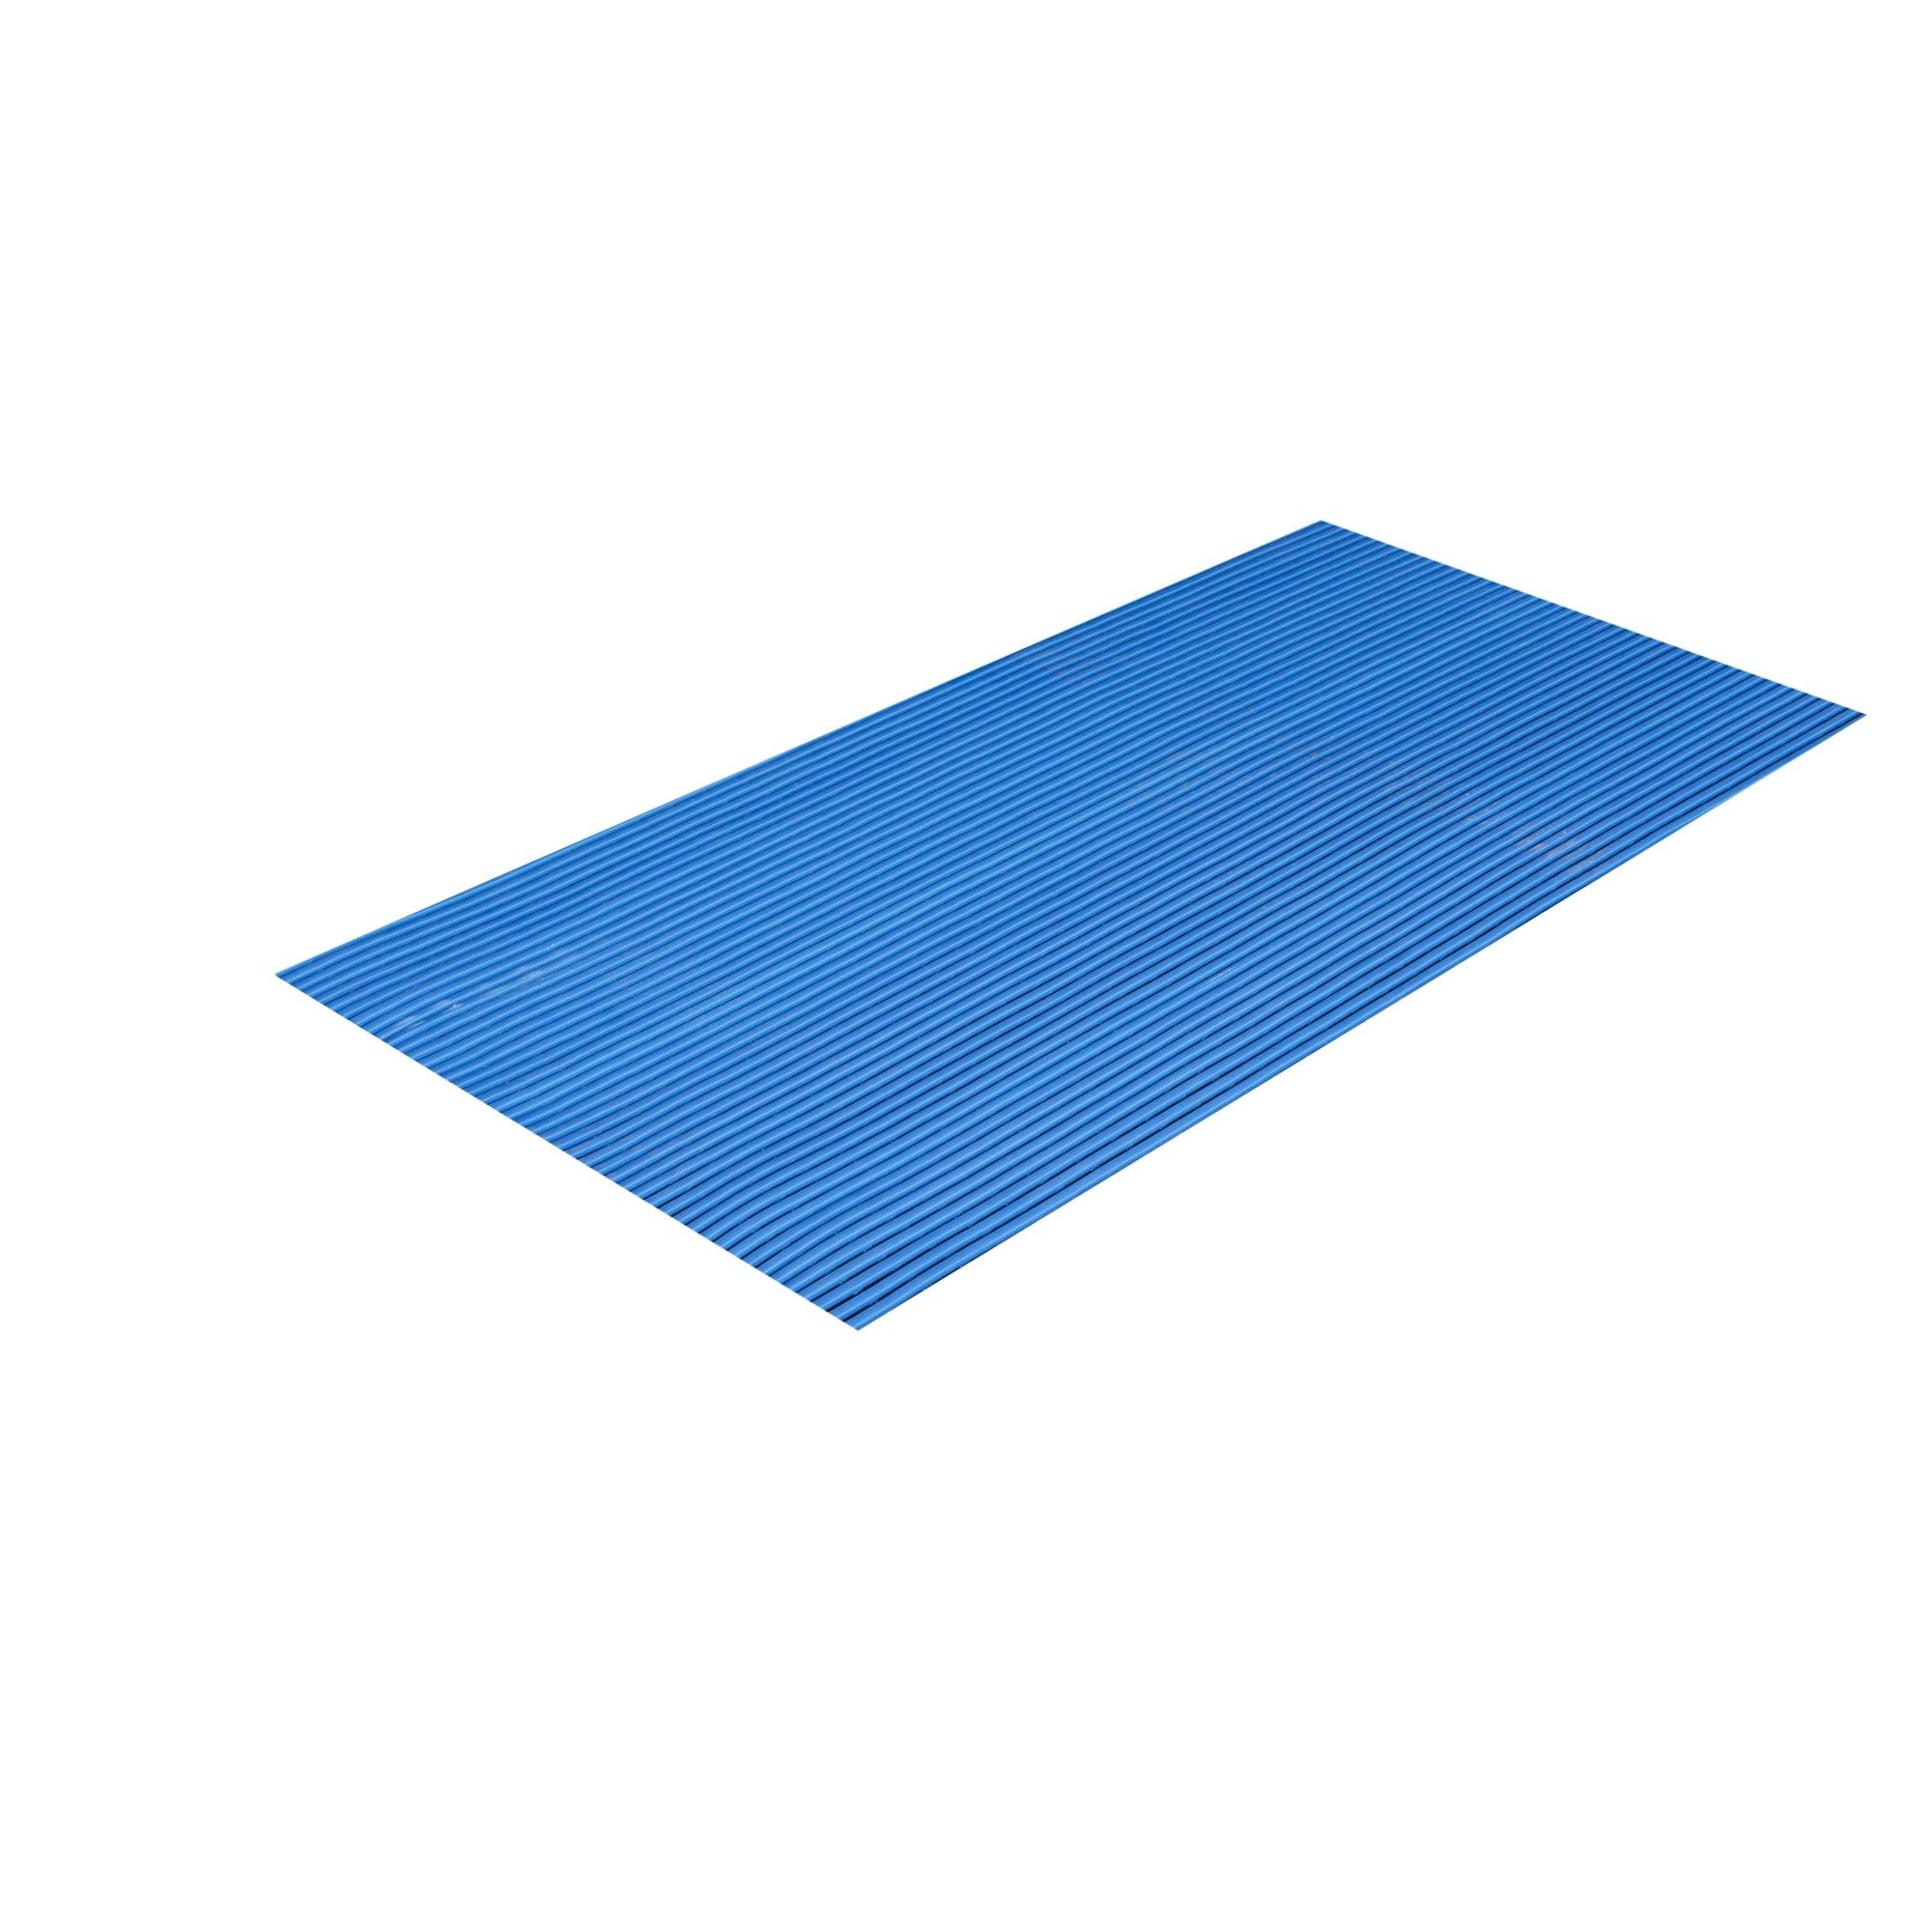 Crown Matting Technologies, Sani-Tred 4ft.x40ft. Ocean Blue, Width 48 in, Length 480 in, Thickness 15/32 in, Model HVR0048OB